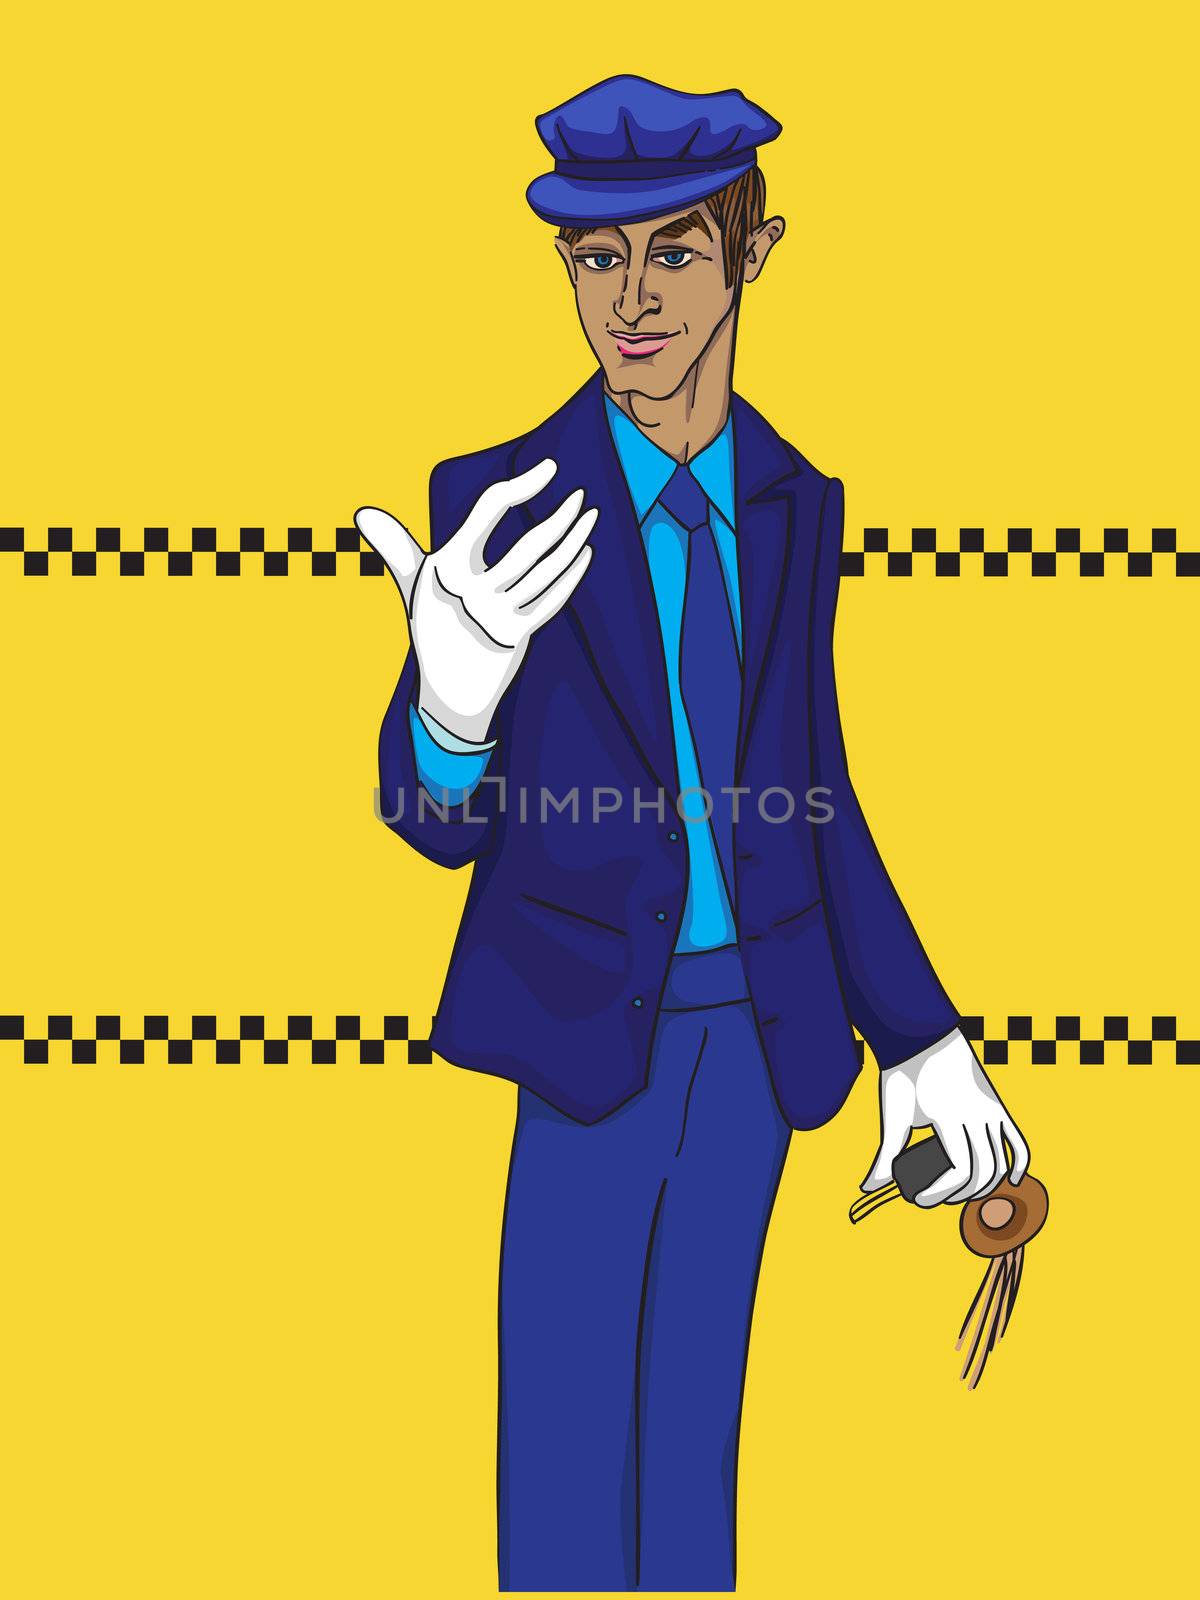 Hand drawn illustration of a limo driver with white gloves over a yellow background with taxi tiles